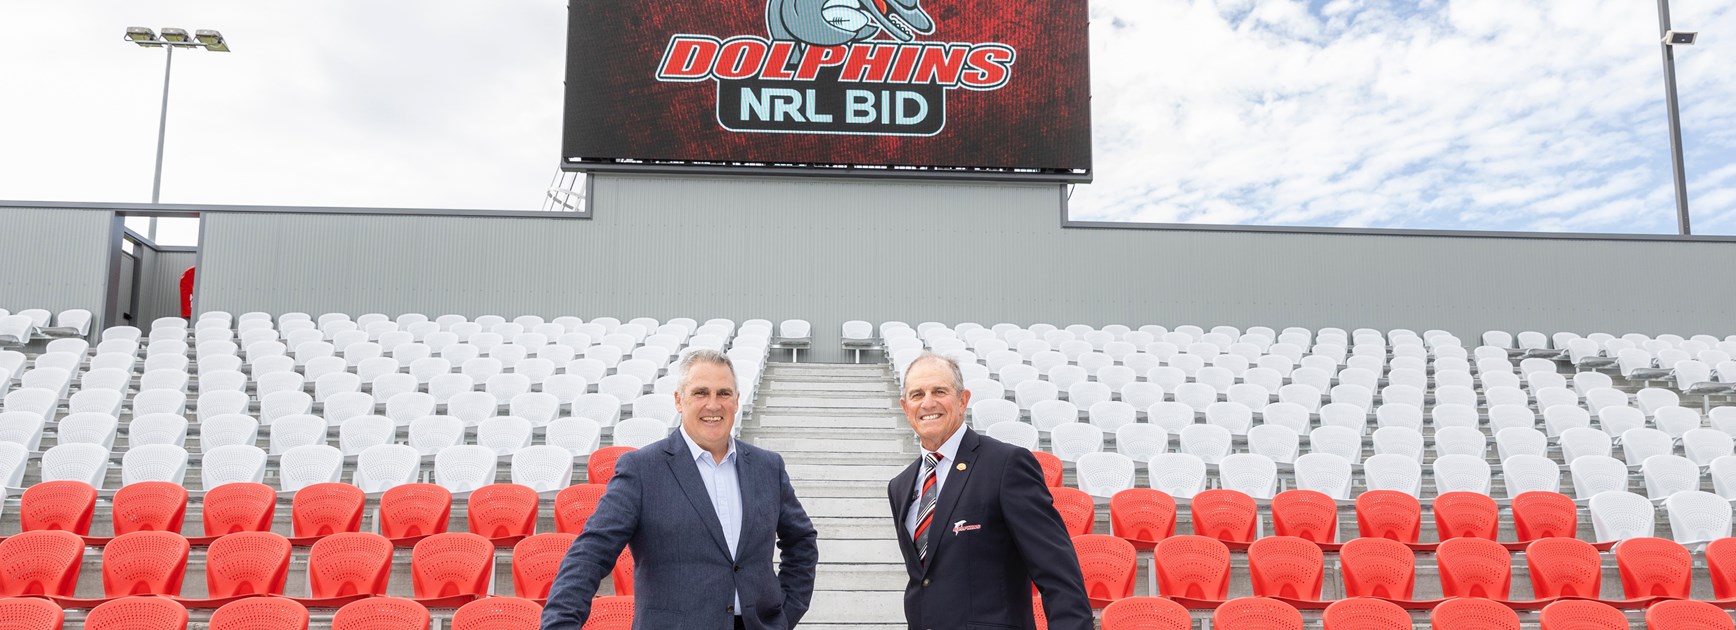 Dolphins bid 'NRL-ready' with new stadium complete